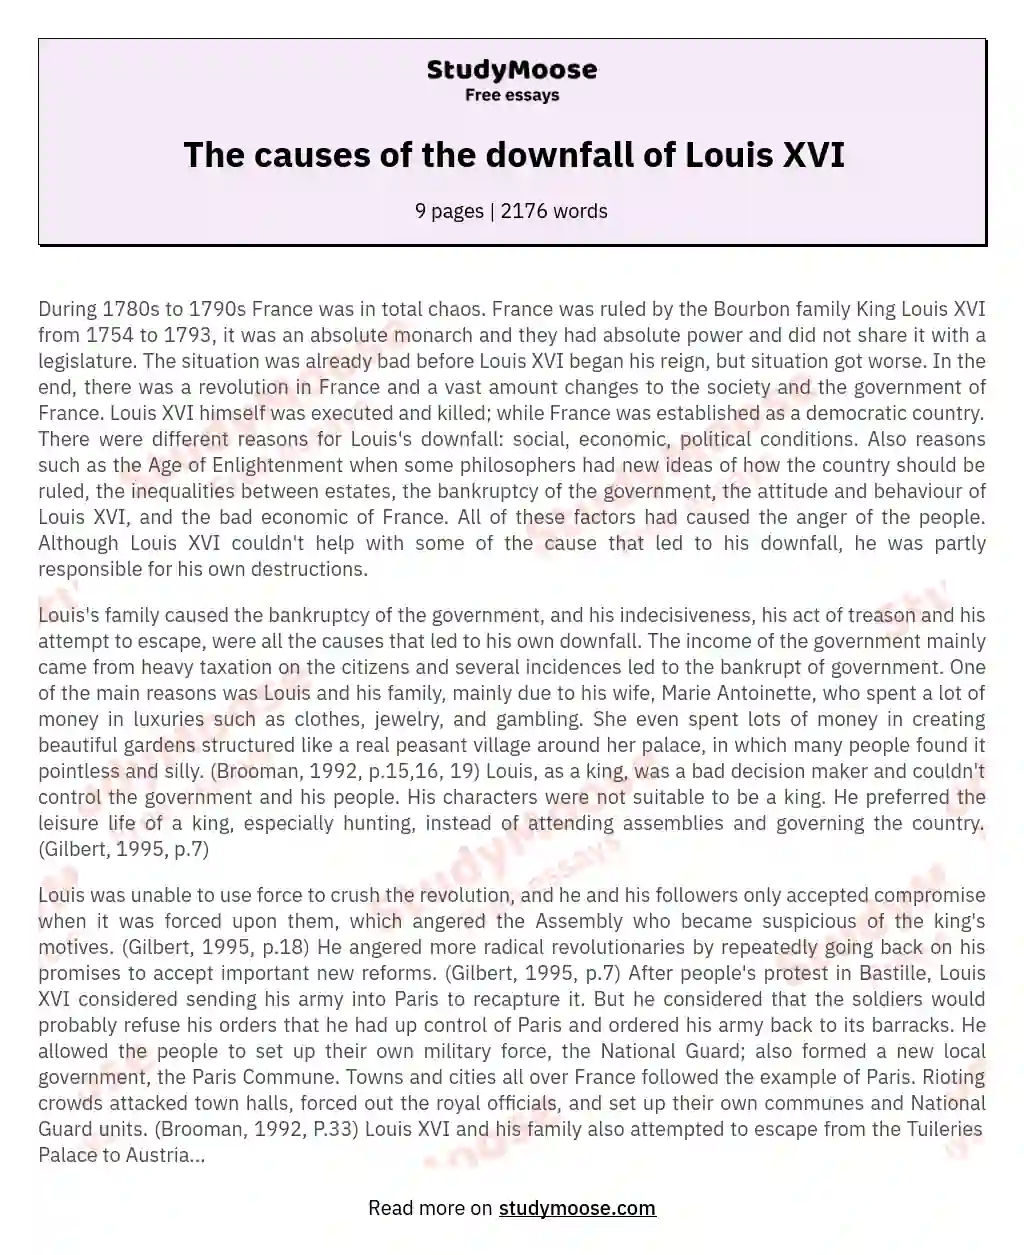 The causes of the downfall of Louis XVI essay